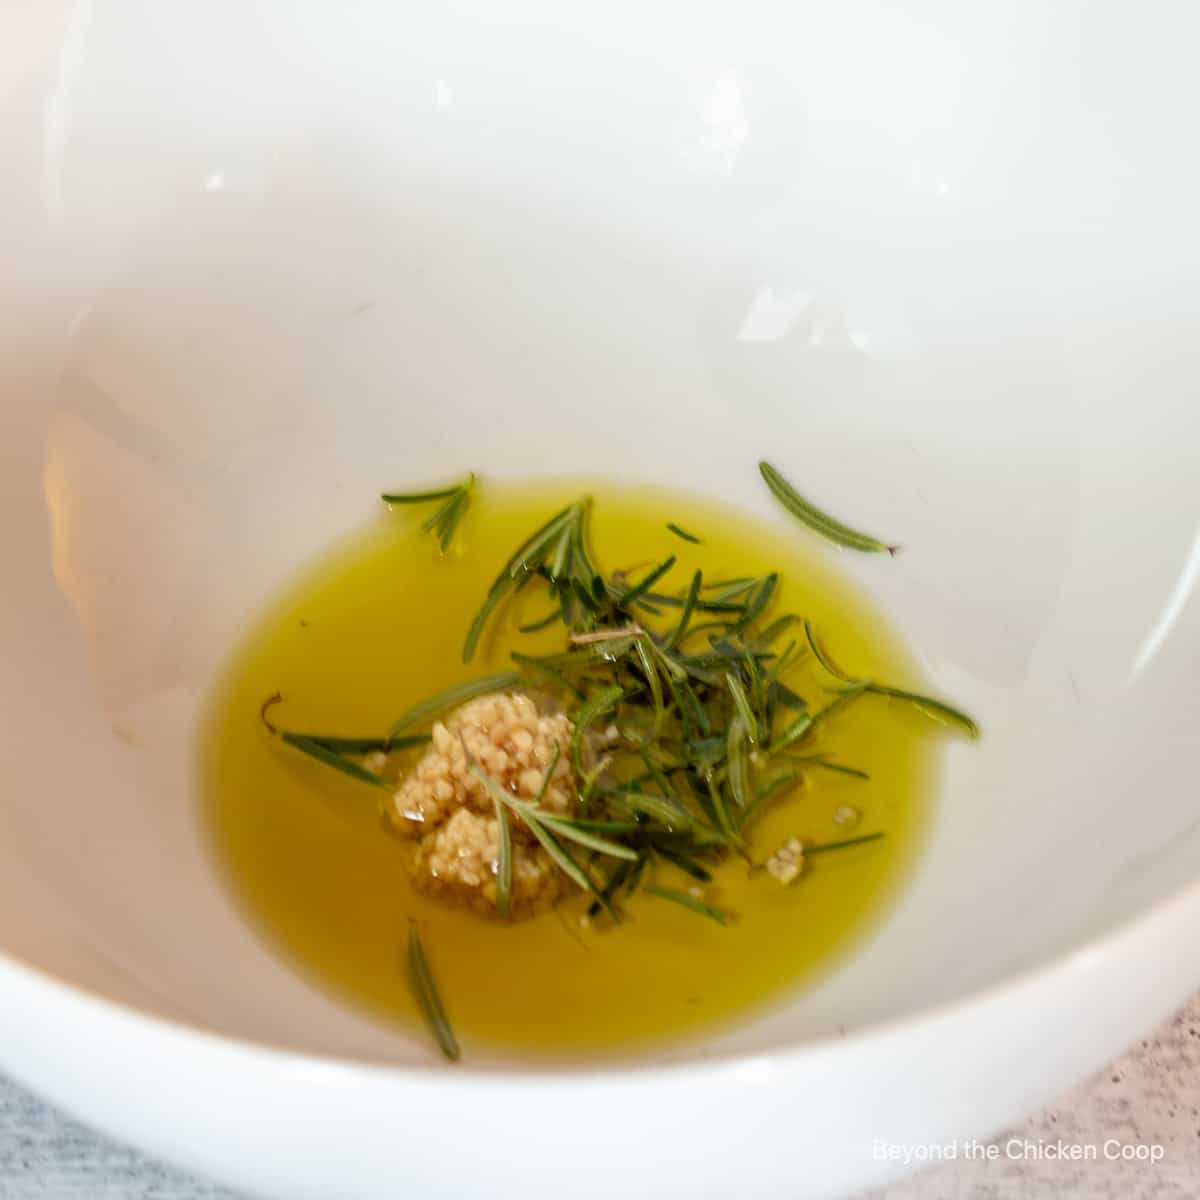 Olive oil with rosemary and garlic.